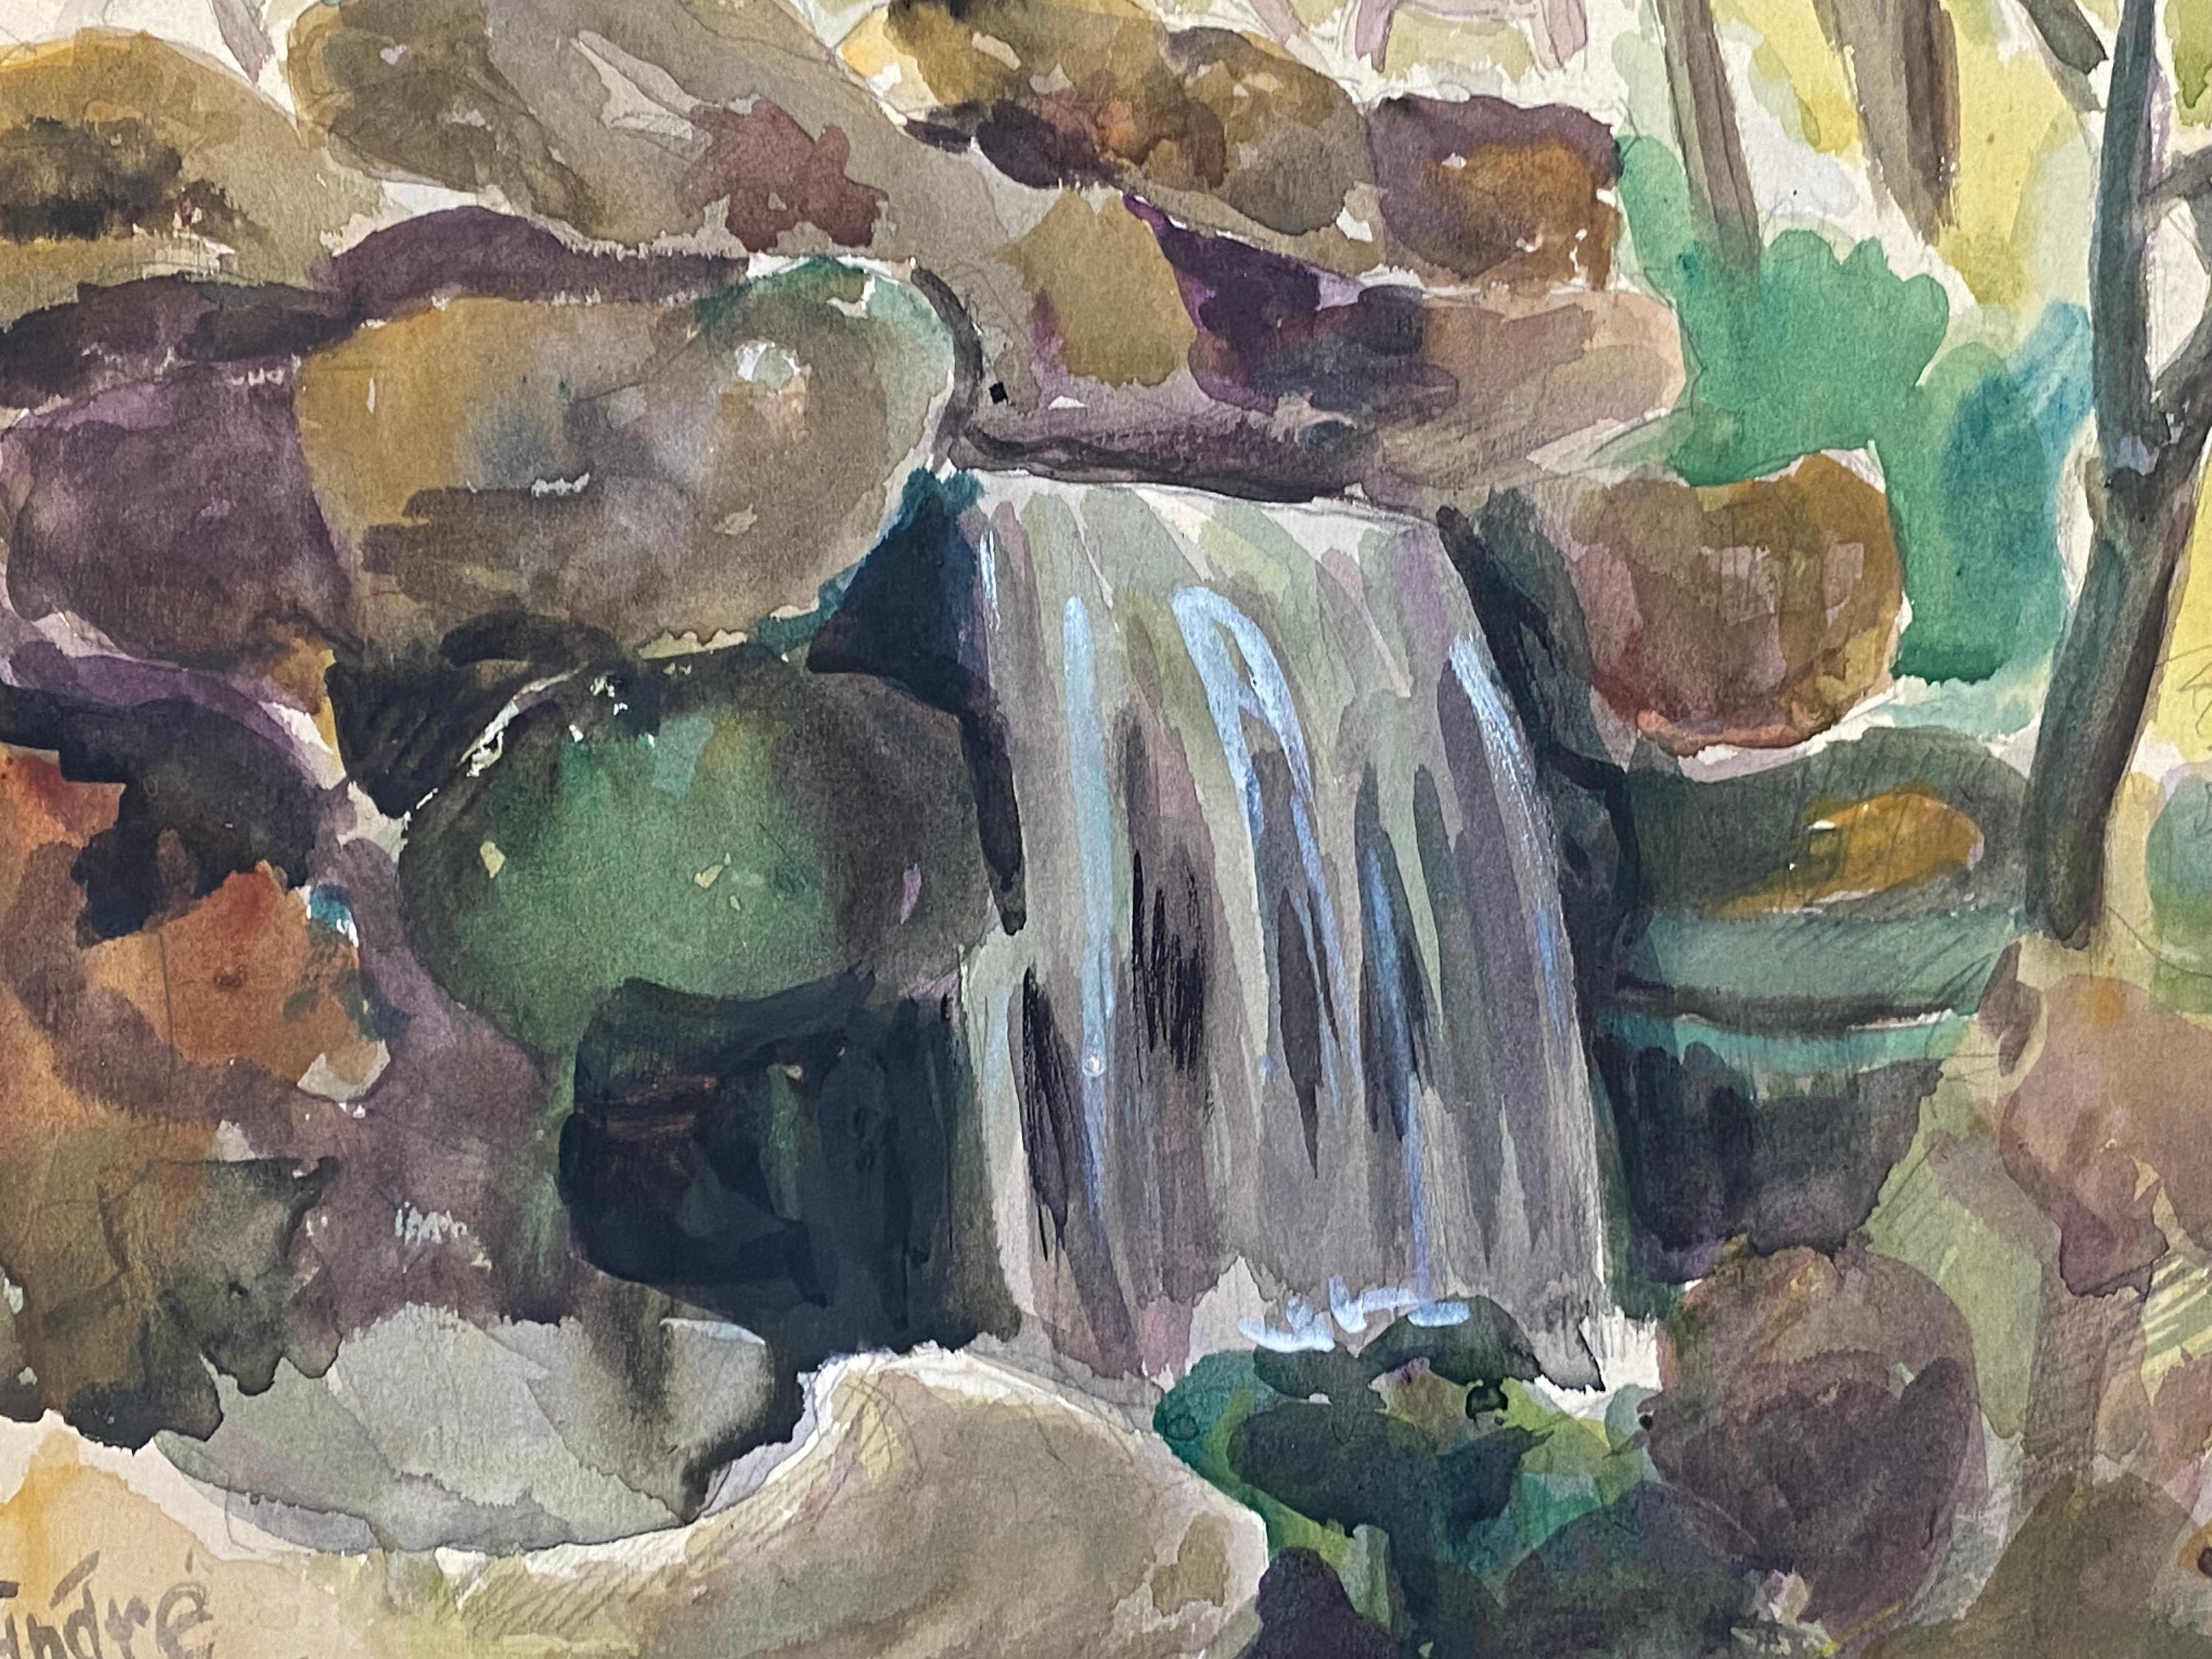 Artist/ School: French school, 20th century, signed.

Title: Rock Waterfall.

Medium: watercolour painting on paper, unframed.

canvas: 12.5 x 16 inches.

Provenance: private collection, France.

Condition: The painting is in overall very